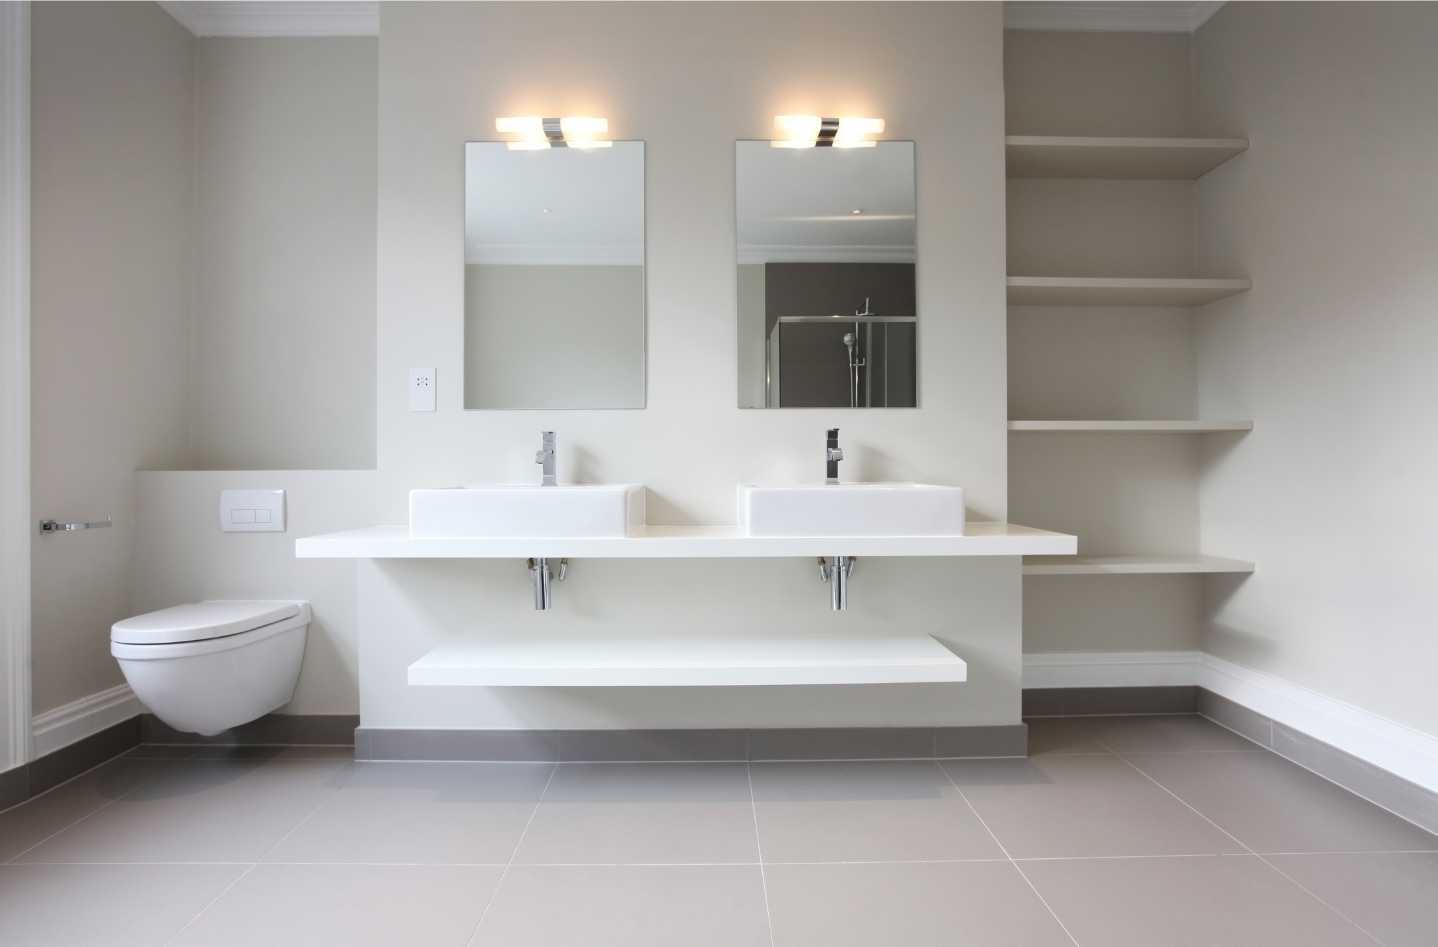 Double sink vanity in the middle of a white washroom, with 2 mirrors and 2 lights above each sink